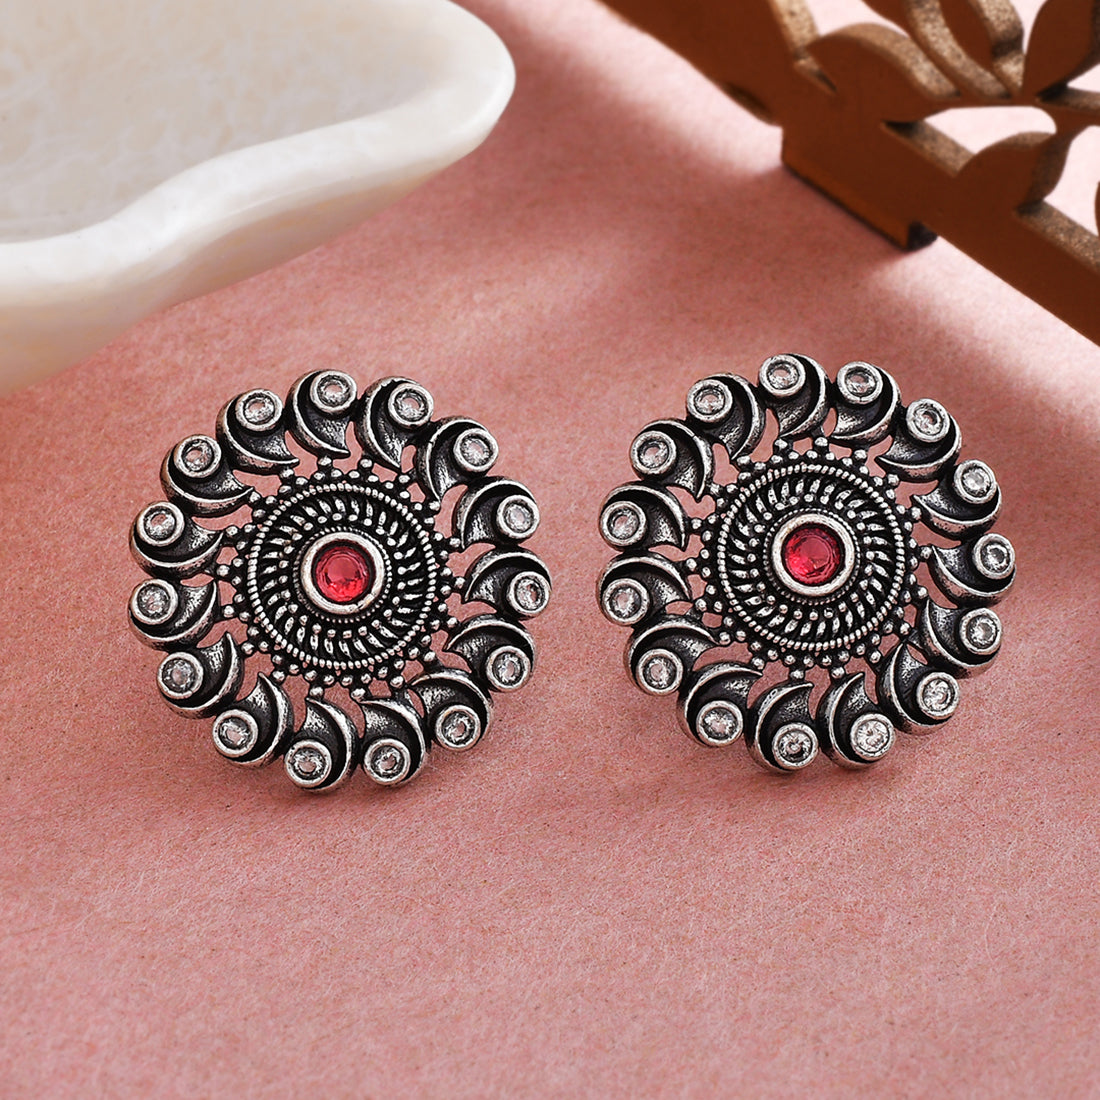 RUBY AND AMERICAN DIAMOND FLORAL DESIGN STUD EARRINGS IN 925 SILVER